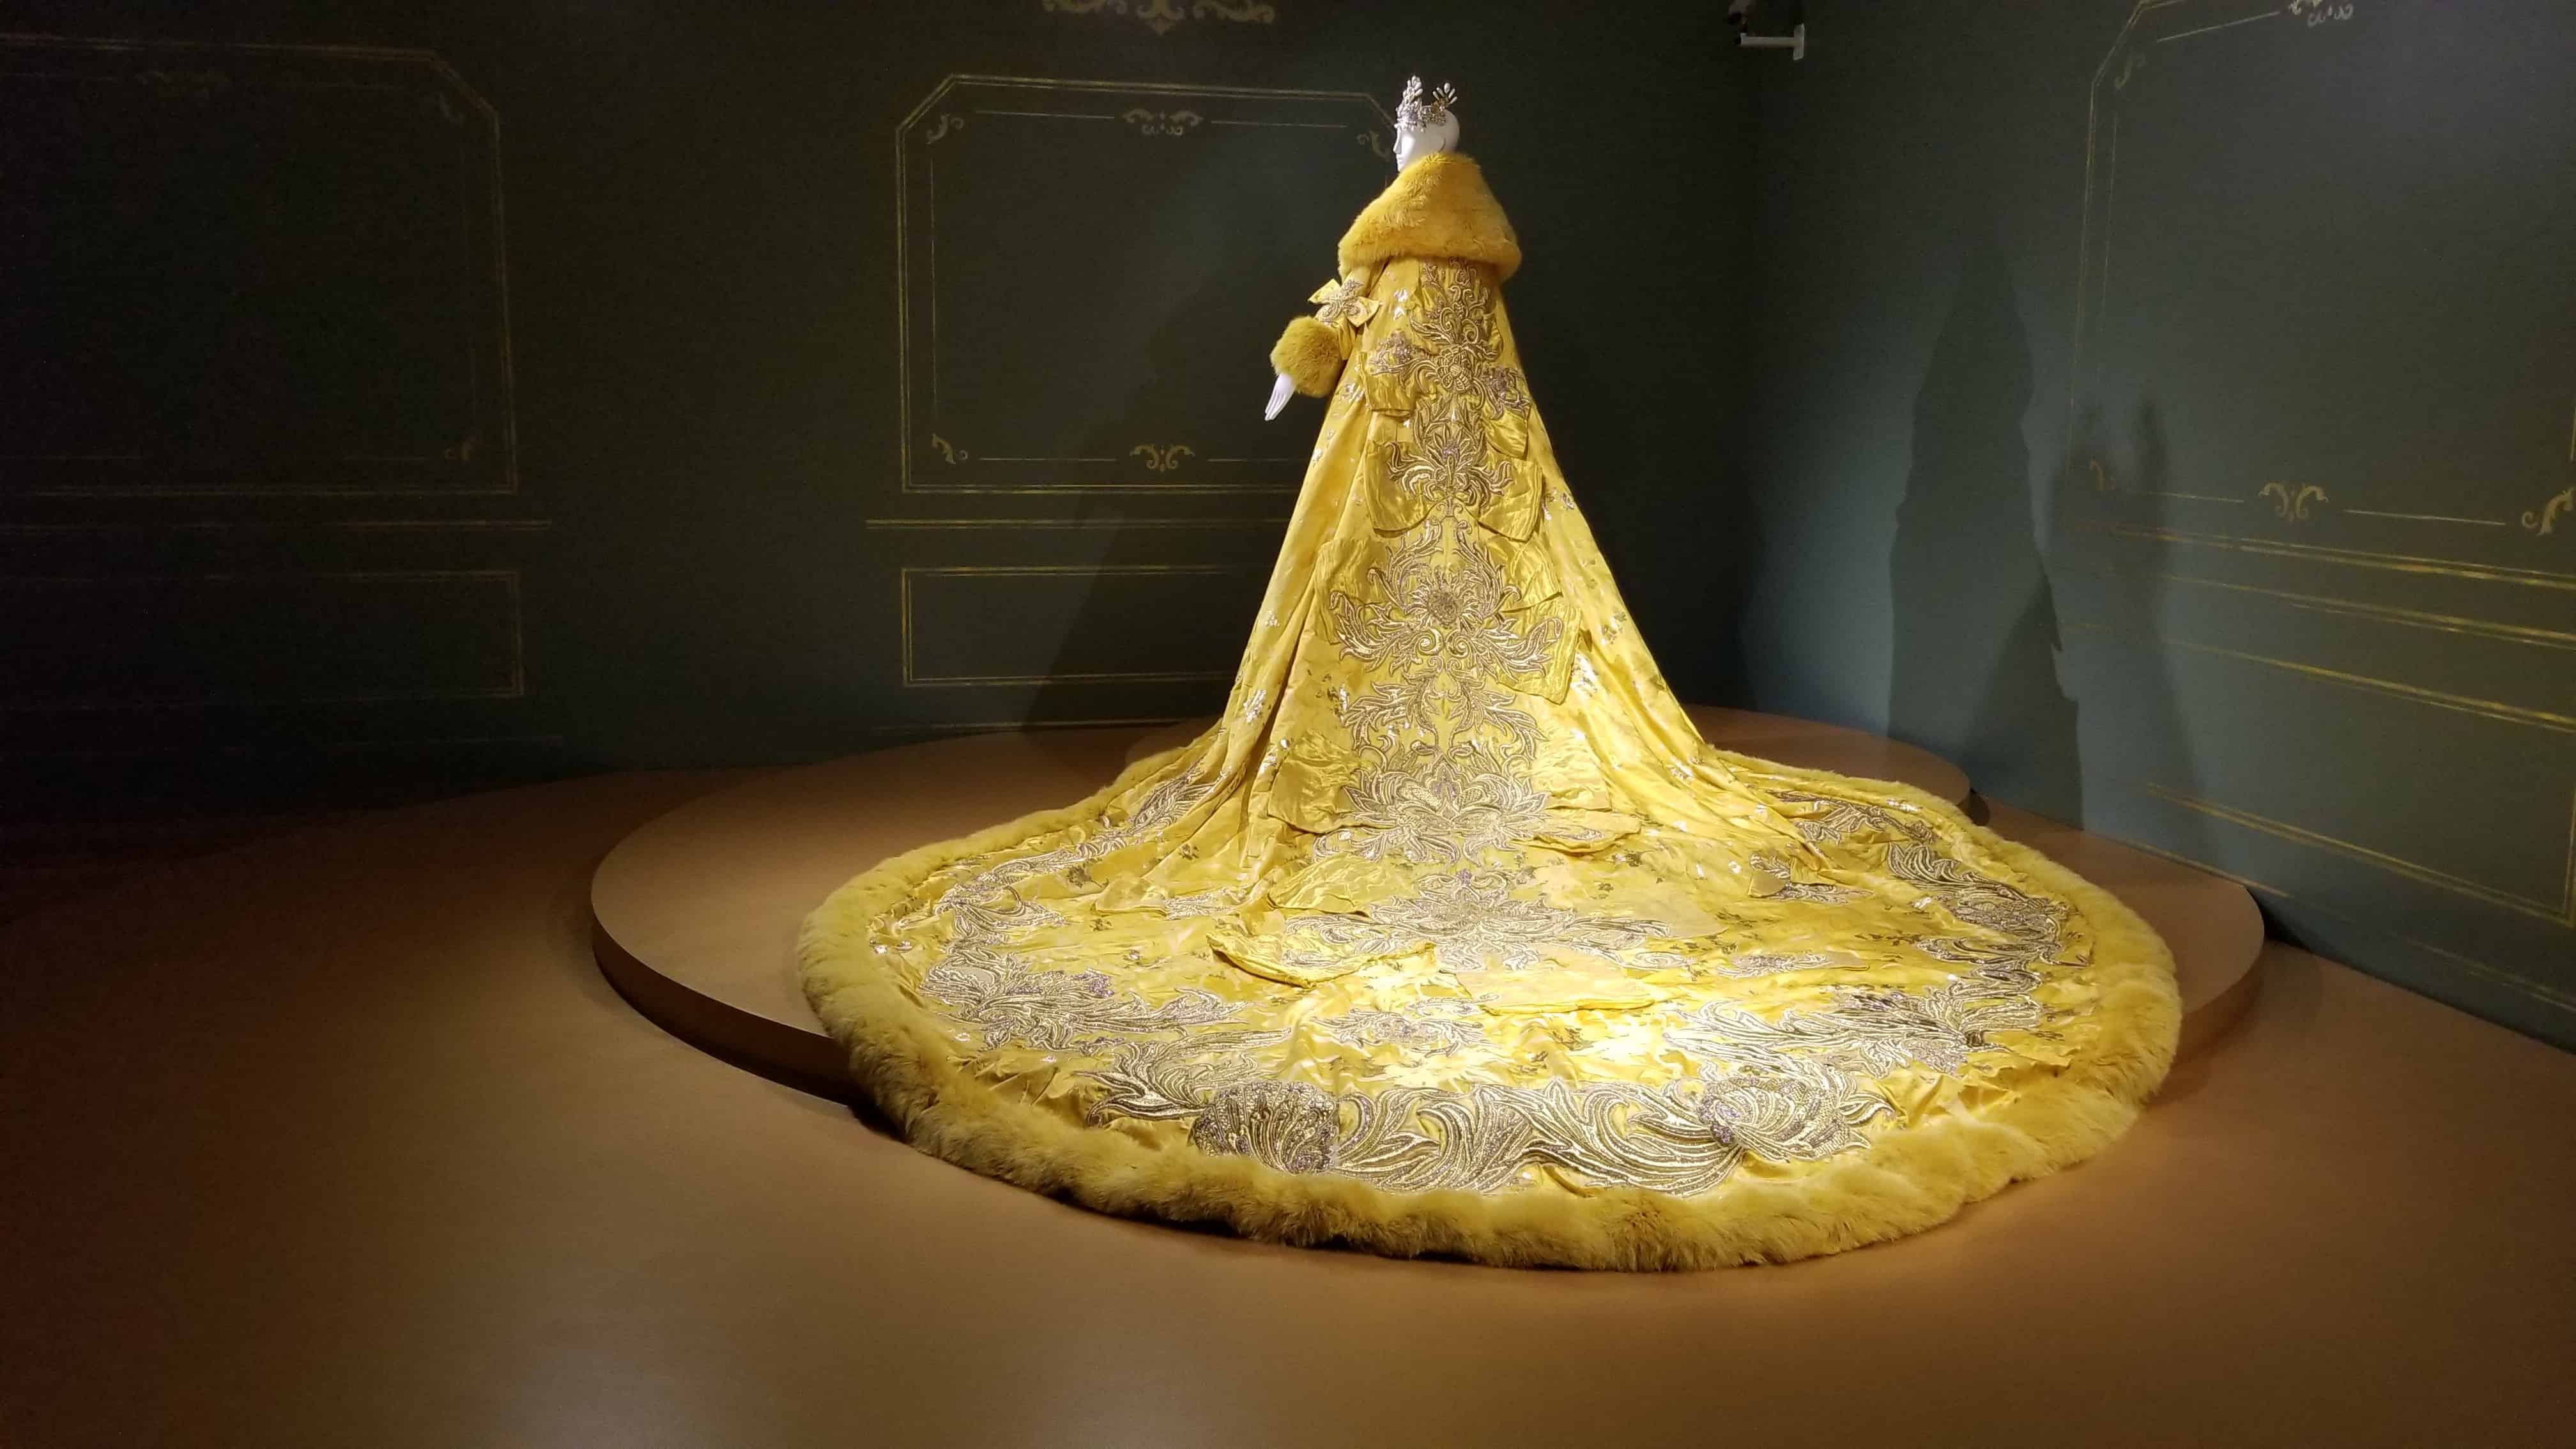 Couture Beyond, Guo Pei, VAG, Haute Couture, Exhibition, Vancouver, BC, Vancity, YVR, BC, luxury lifestyle, helen siwak, ecoluxluv